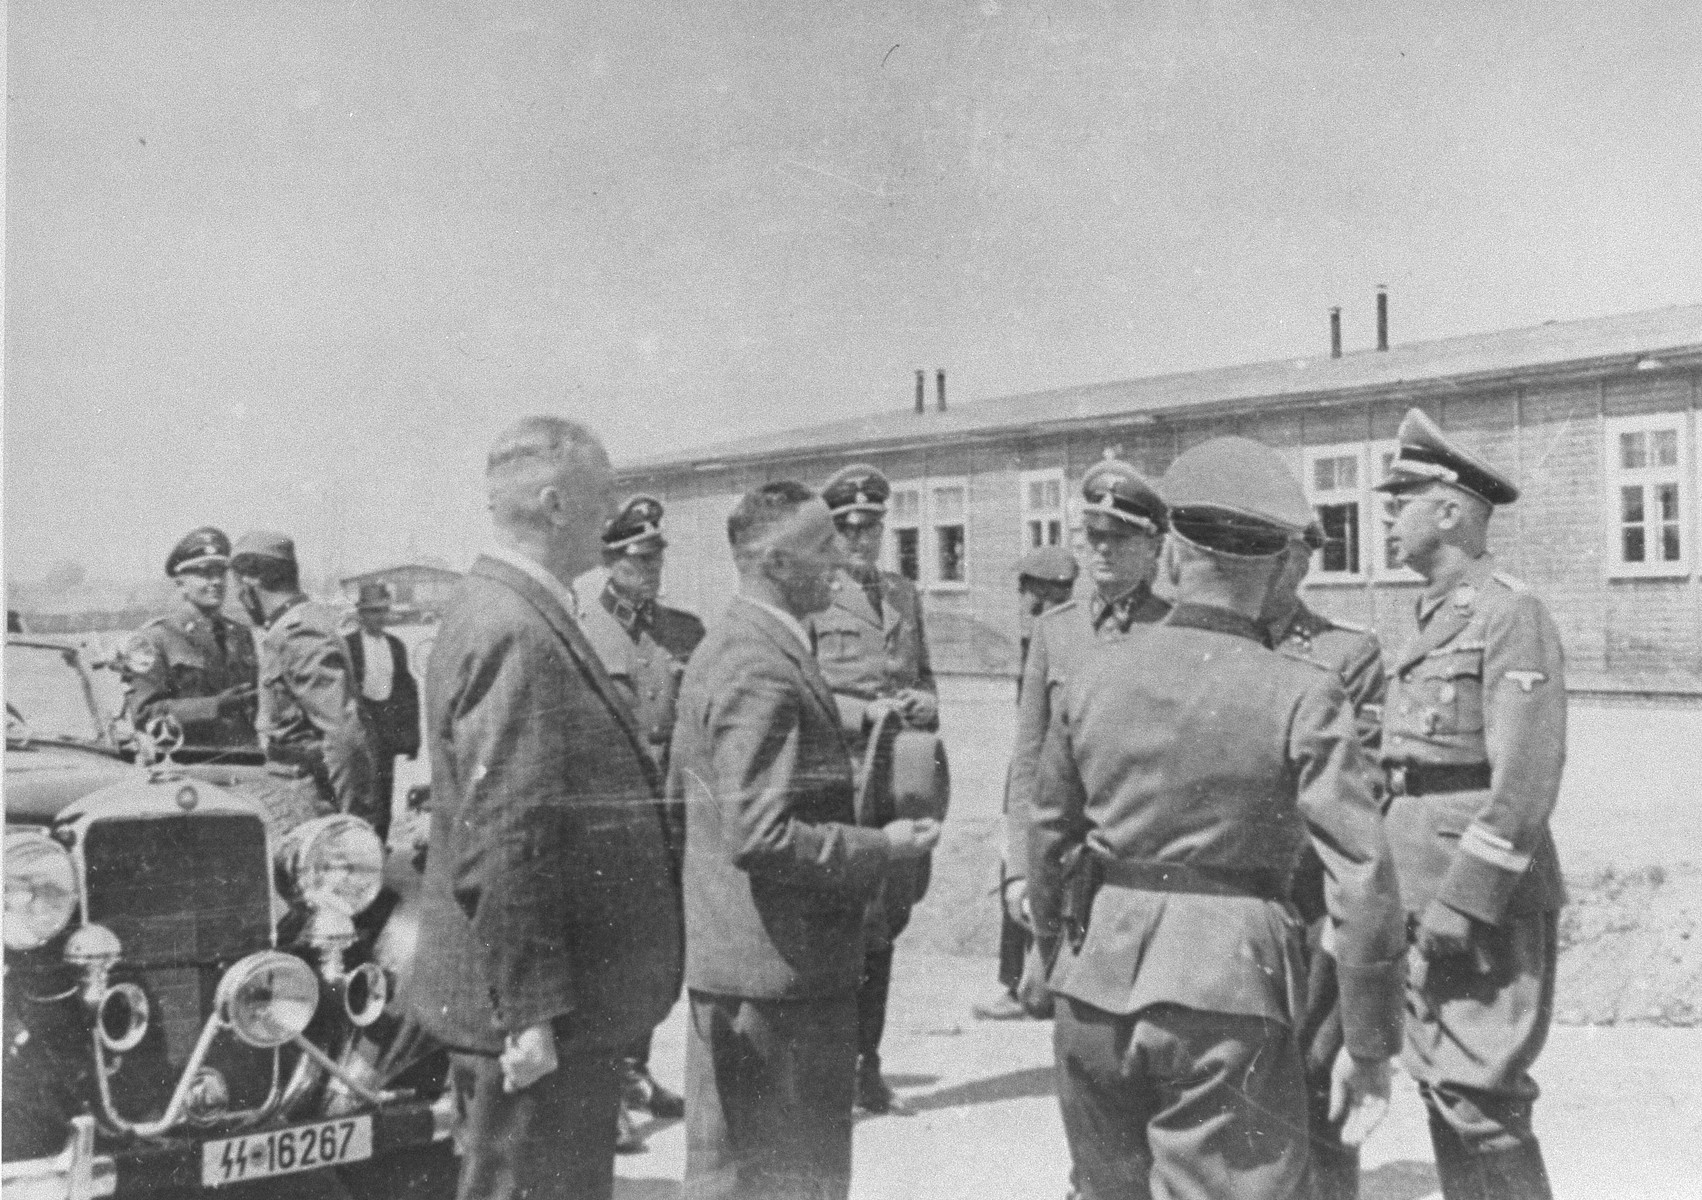 Reichsfuehrer SS Heinrich Himmler converses with Max Faust (holding the fedora) during a tour of the Monowitz-Buna building site.

Faust, who was an IG Farben engineer, was the head of building operations at Monowitz-Buna.